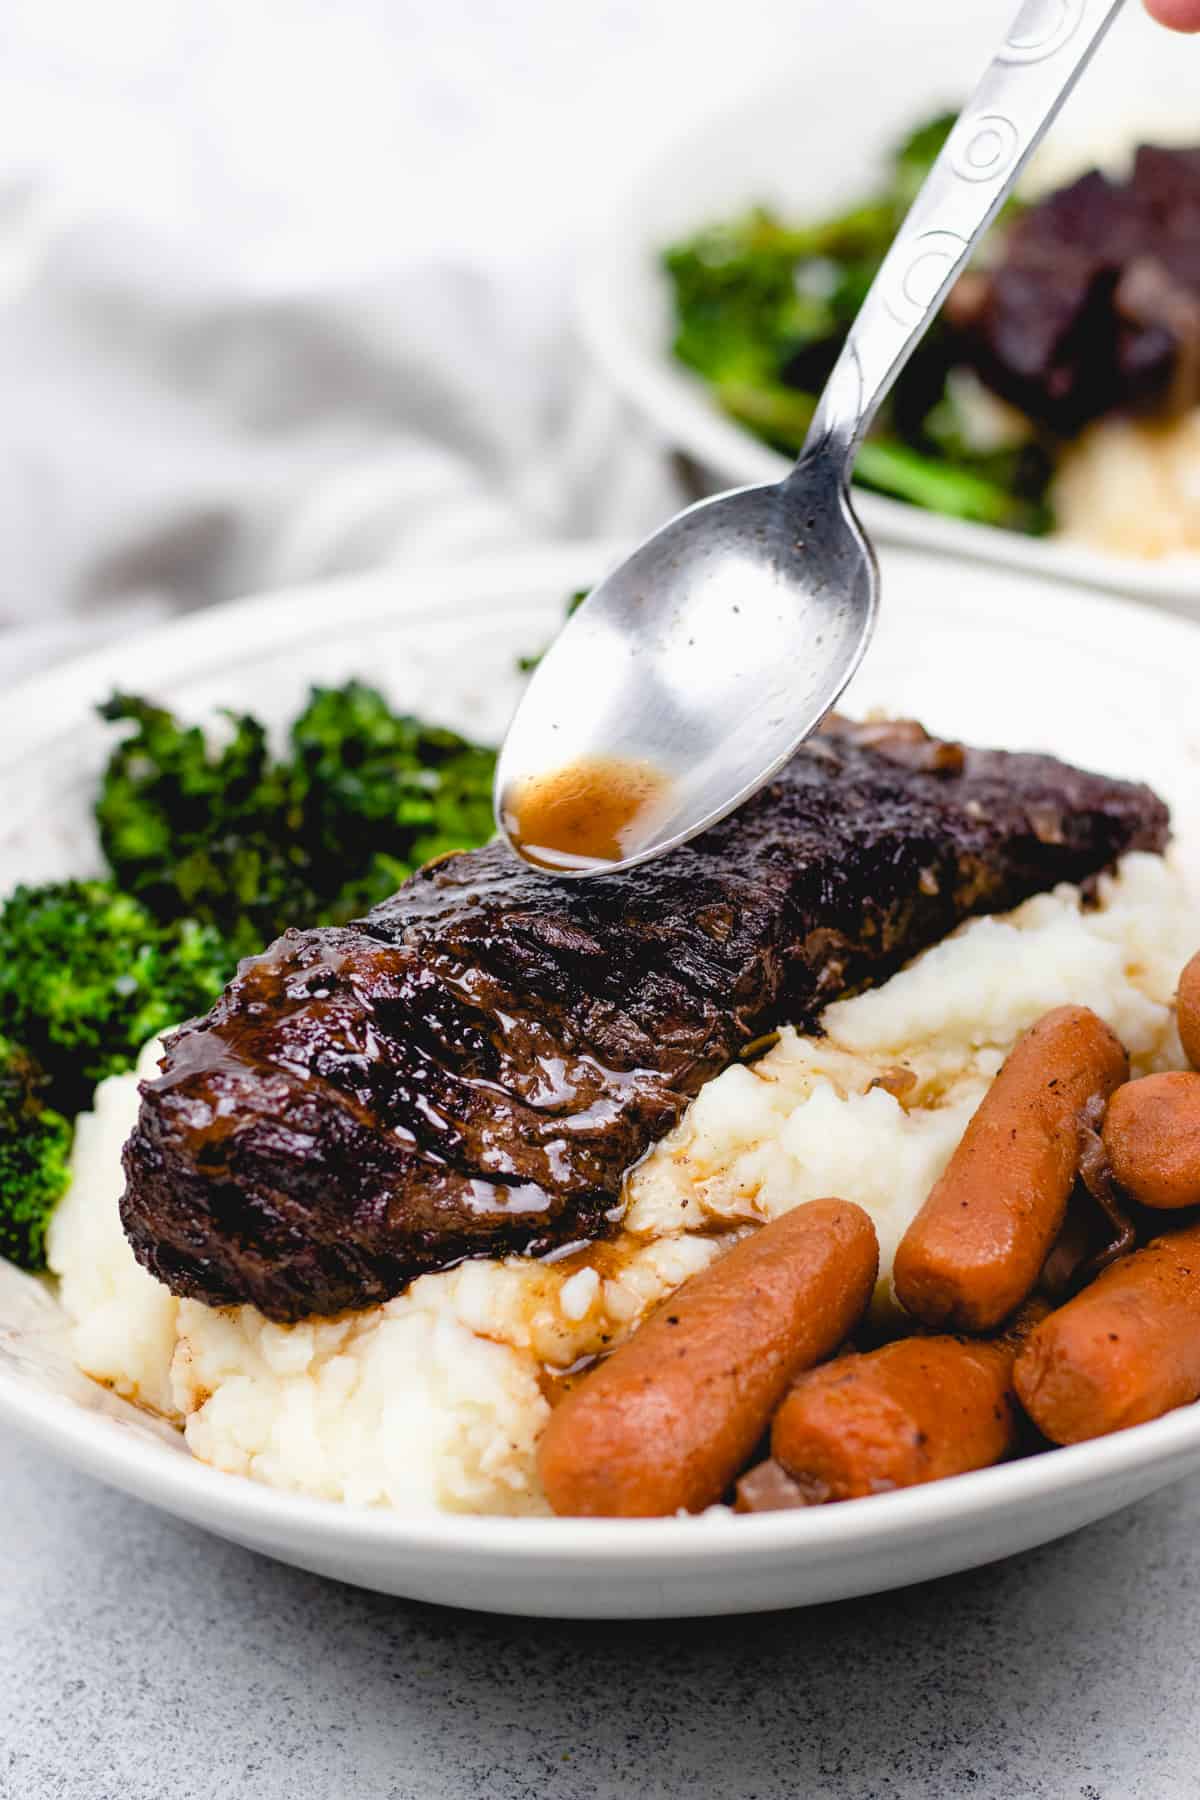 Pouring gravy over Boneless short rib, mashed potatoes, broccoli, and carrots in a bowl.